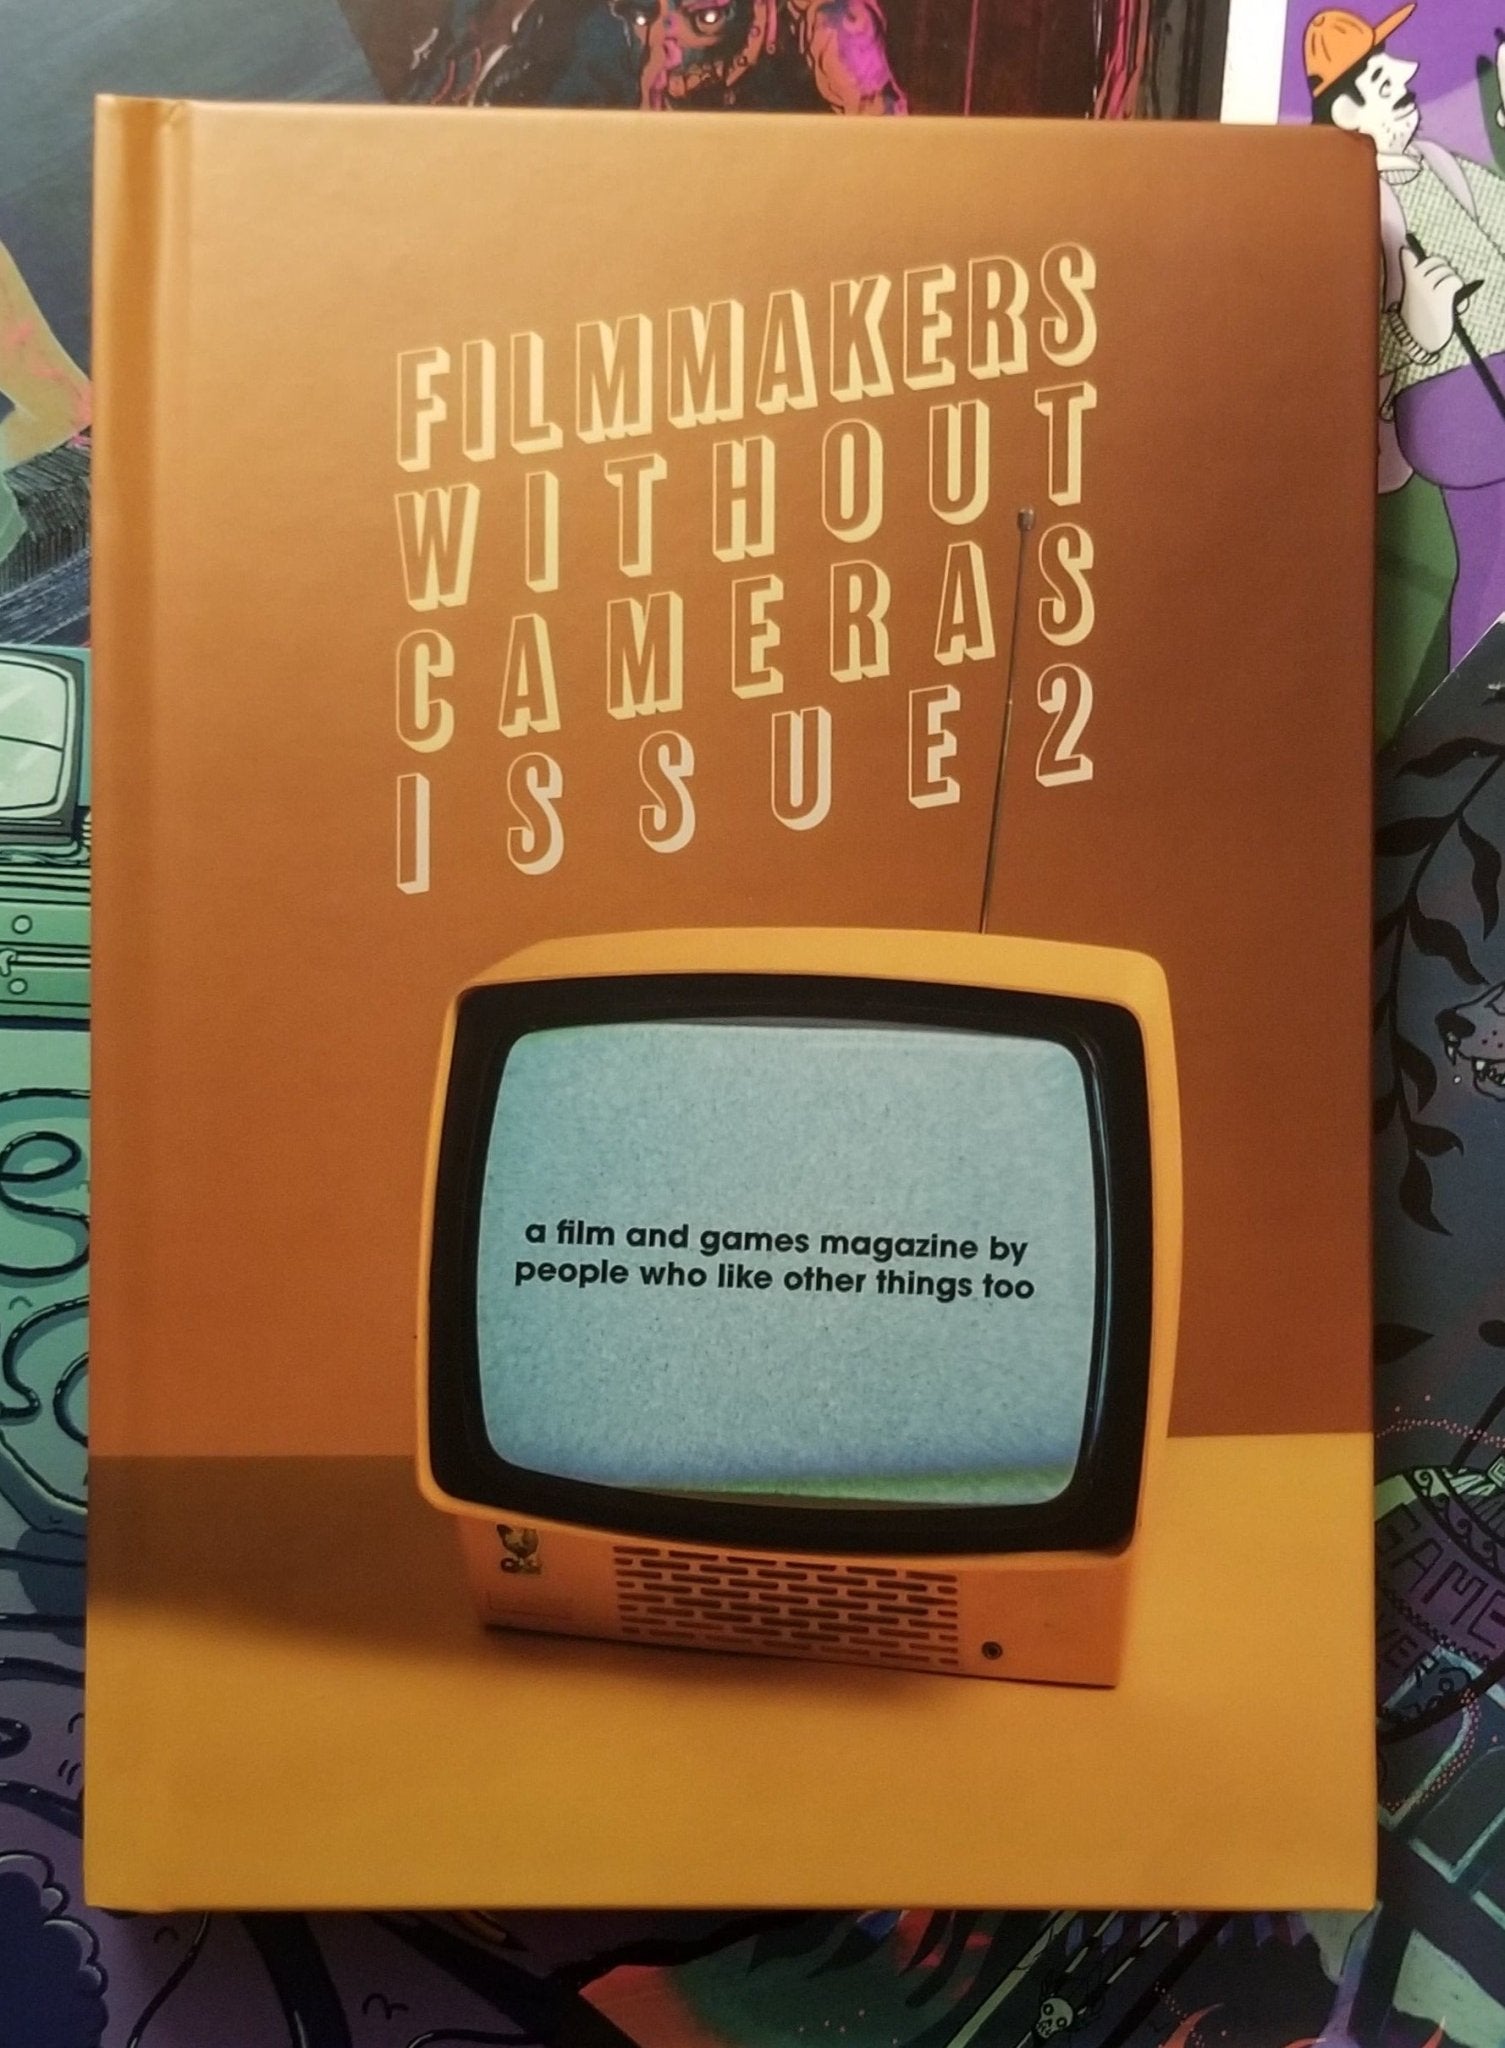 Filmmakers Without Cameras: Issue 2